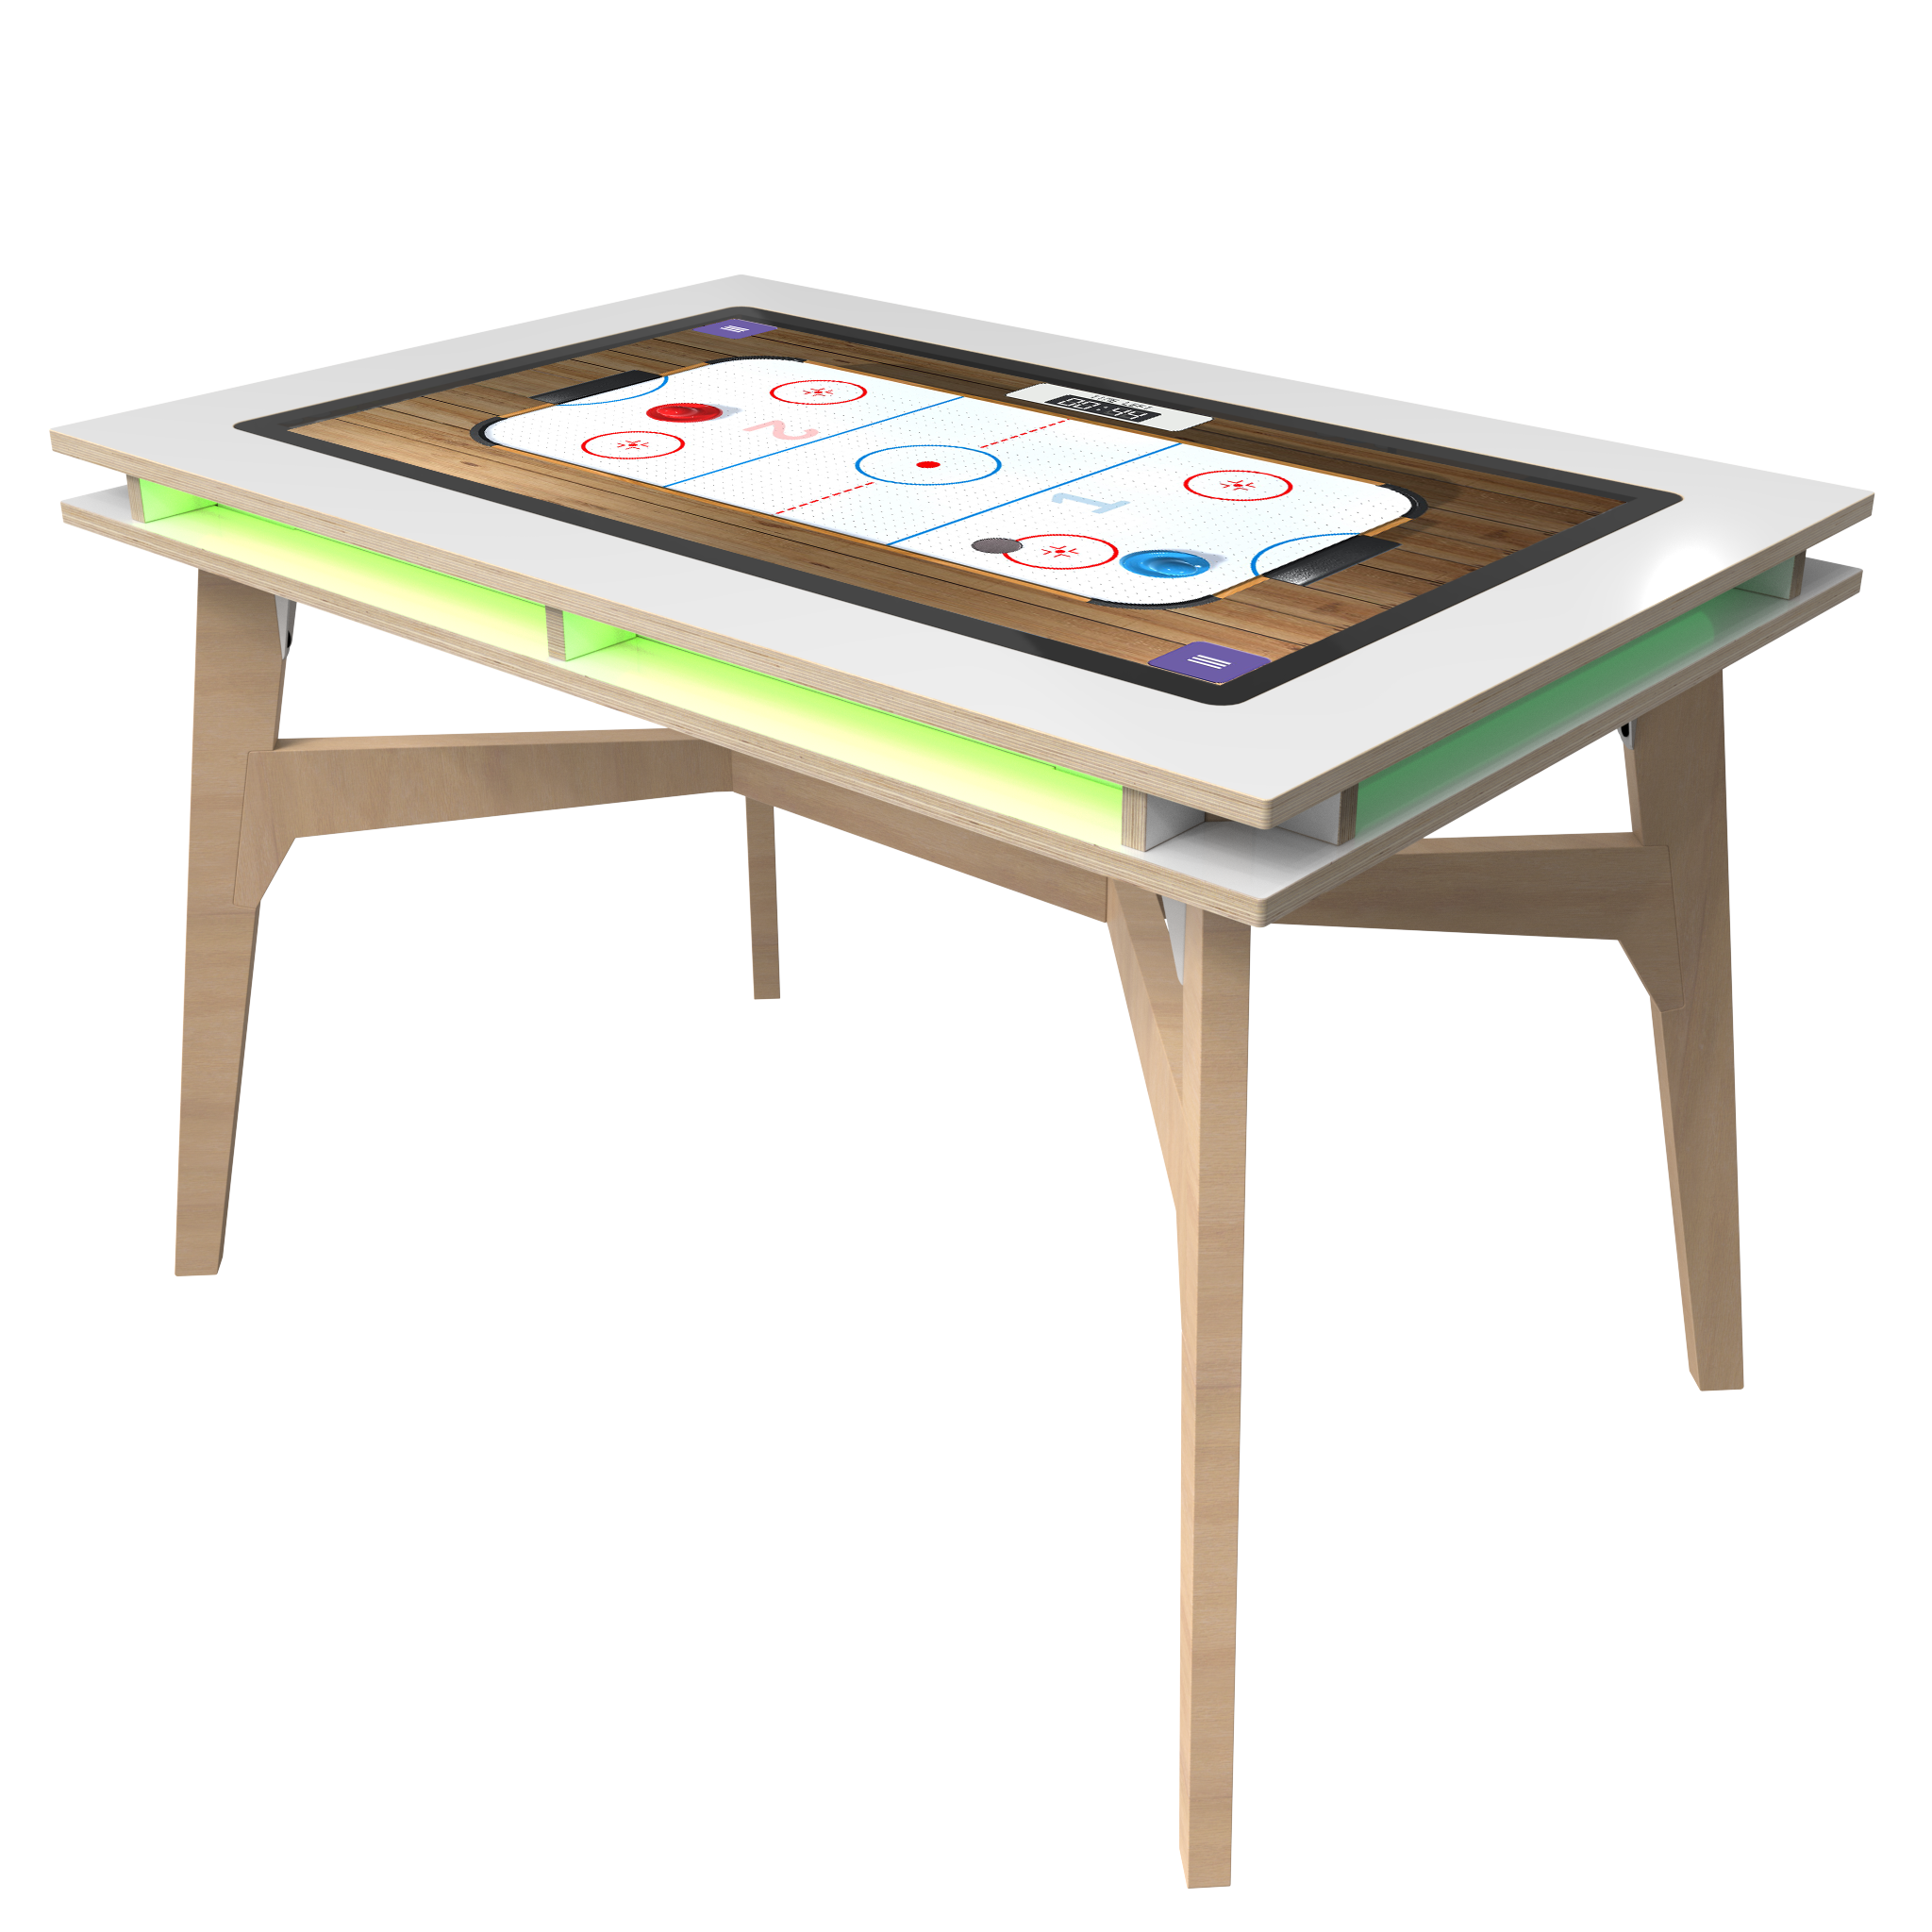 Grillig Klik Maryanne Jones One 4 All Touch Table | IKC interactive playsystems